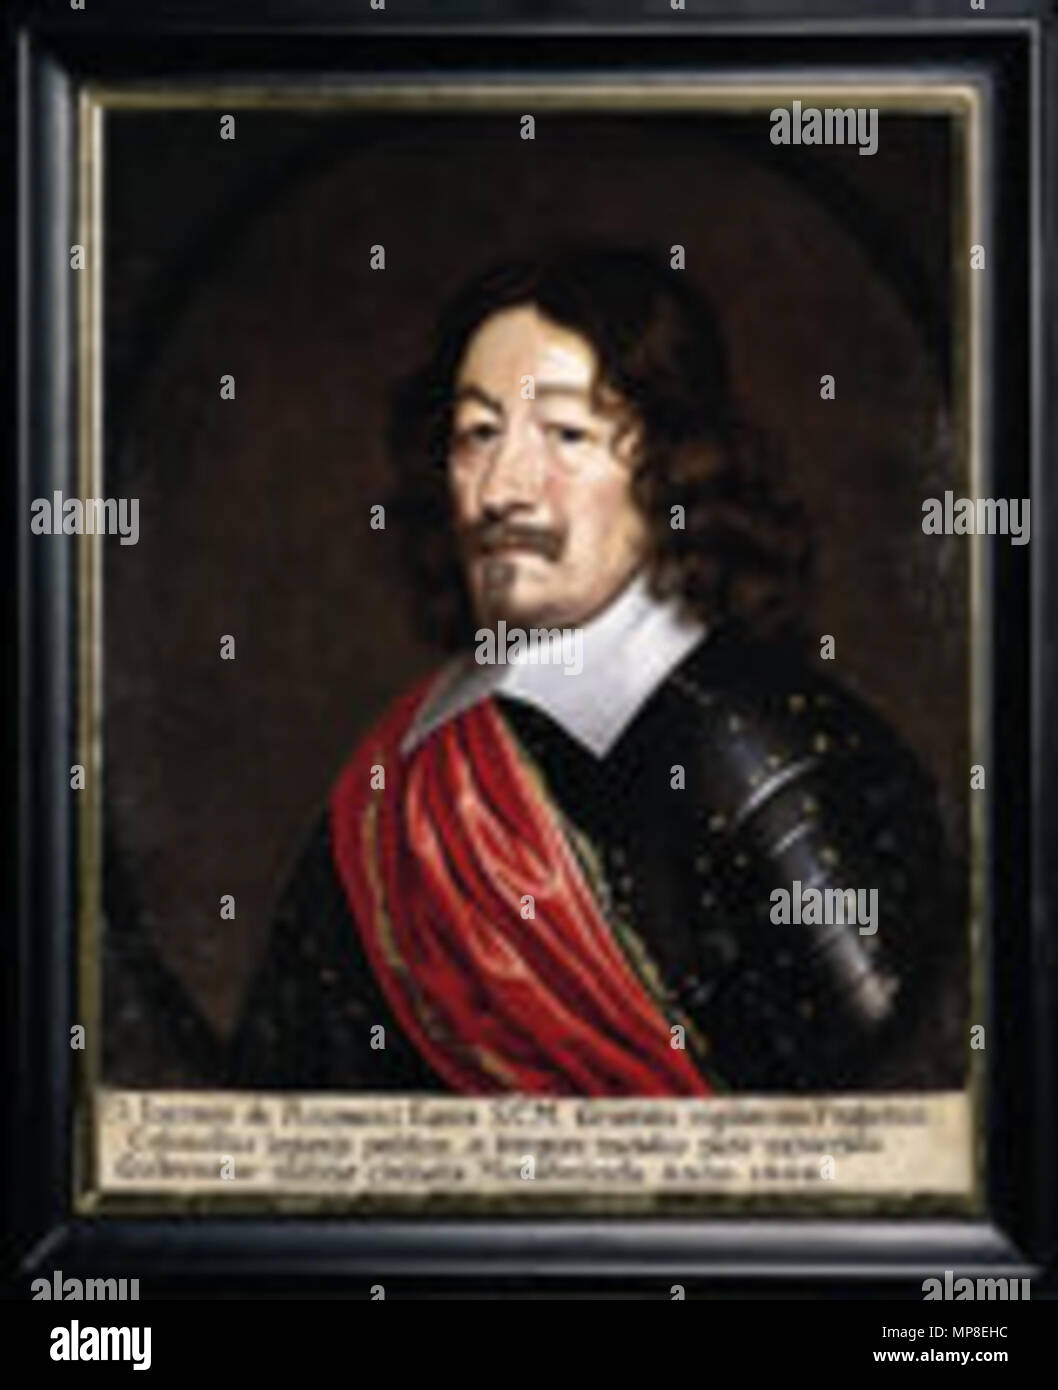 . English: Johann of Reumont, Commander of the troops in Münster, Westphalia, Germany, during the negotiation for the Peace of Westphalia. circa 1640/50. Unknown 730 JohannOfReumont Stock Photo